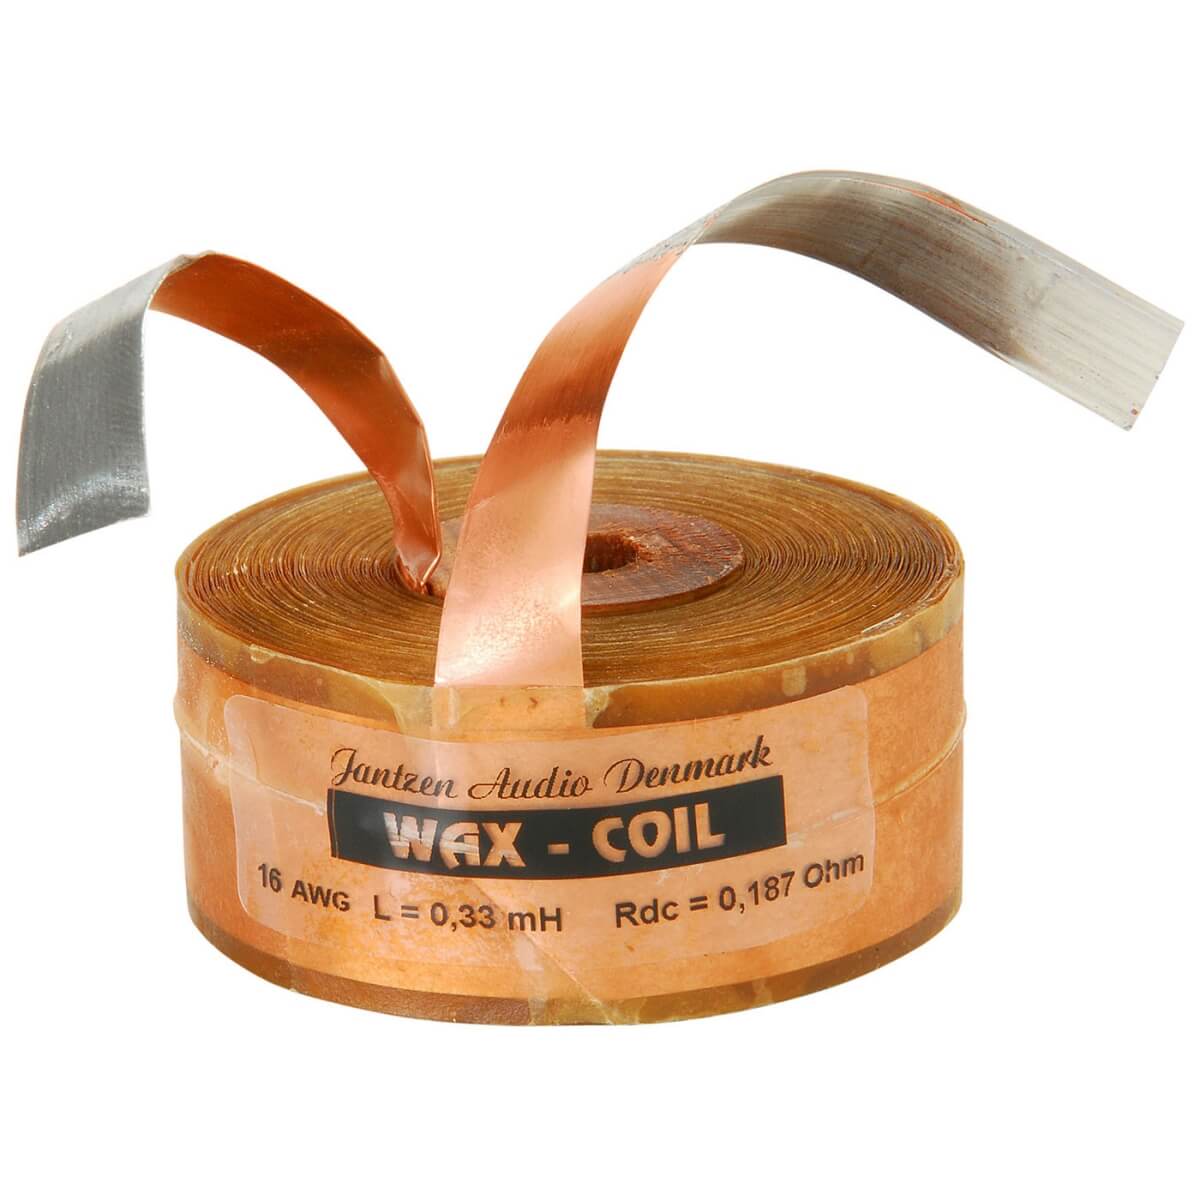 JANTZEN AUDIO WAX COIL Waxed Taped Coil 8AWG 0.49mH